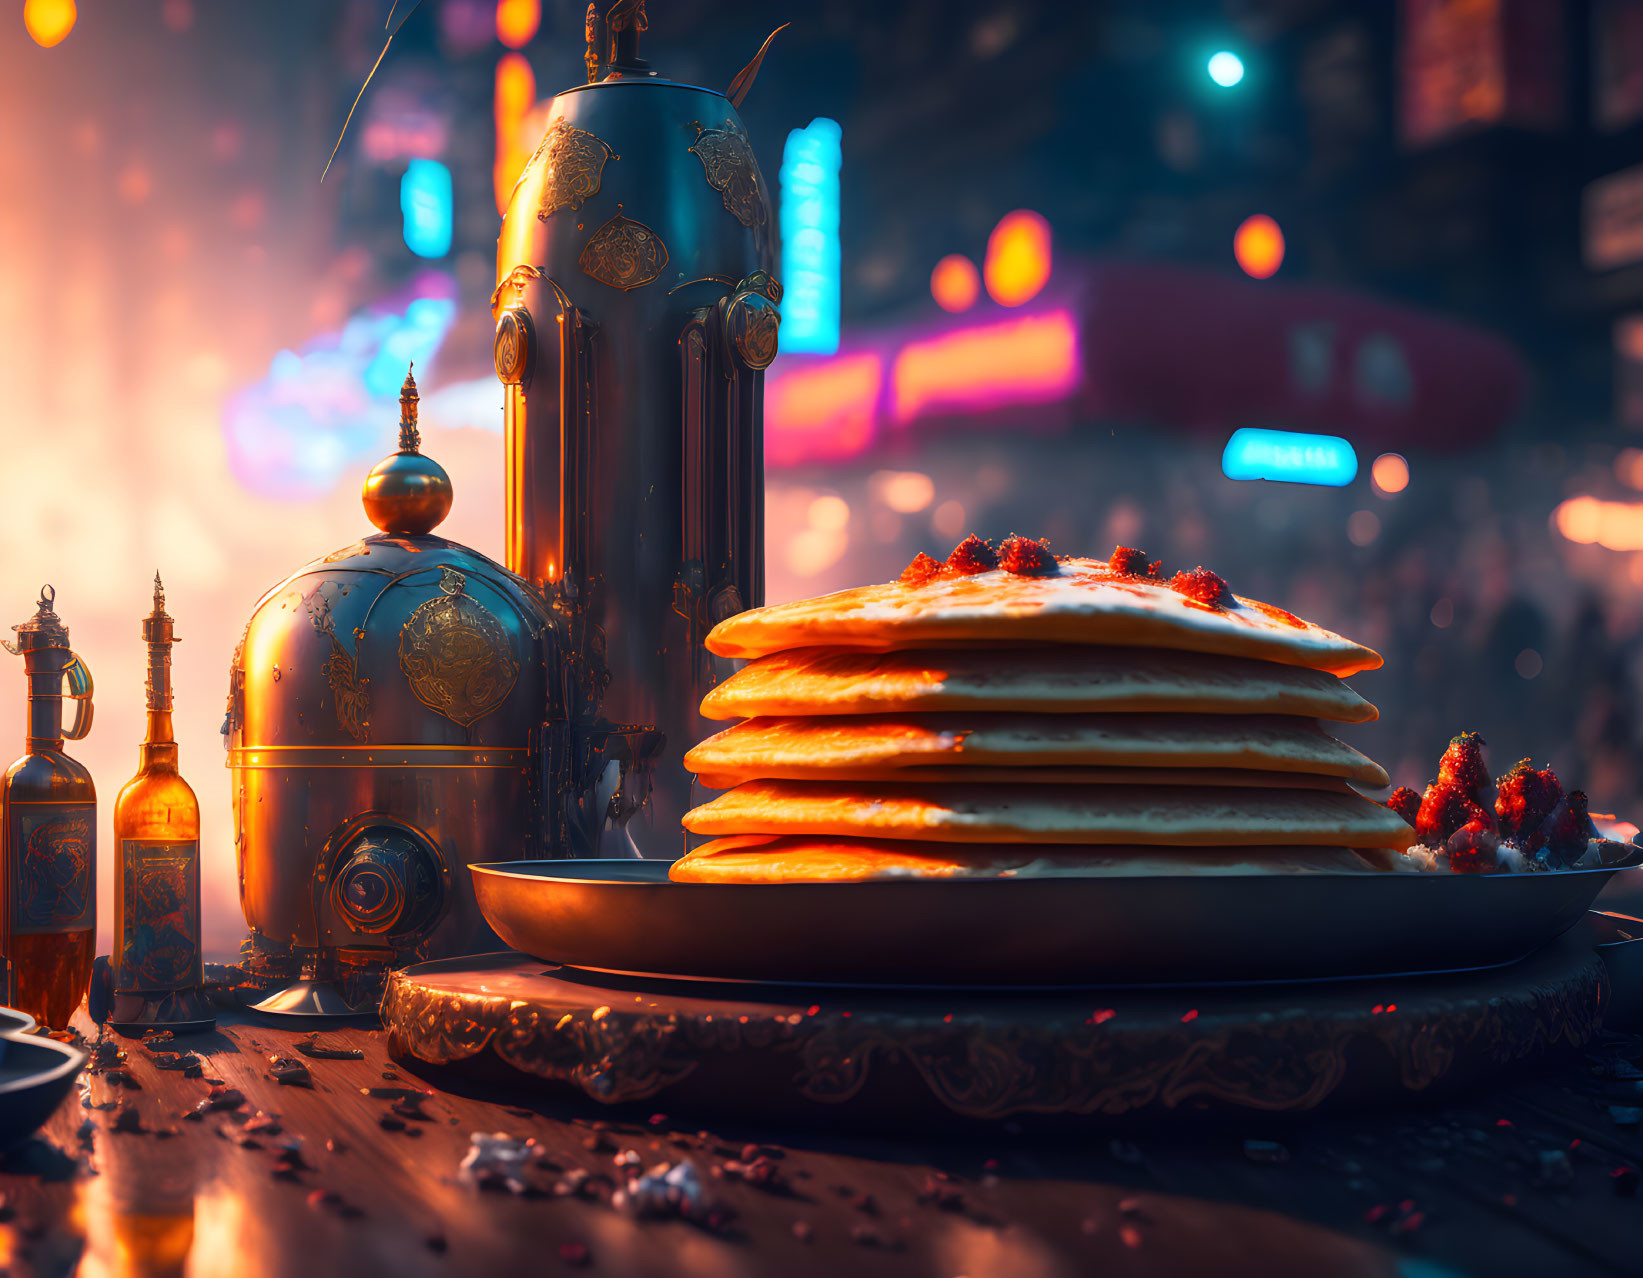 Stack of pancakes with toppings on plate near ornate bottles and vintage teapot, street scene in background